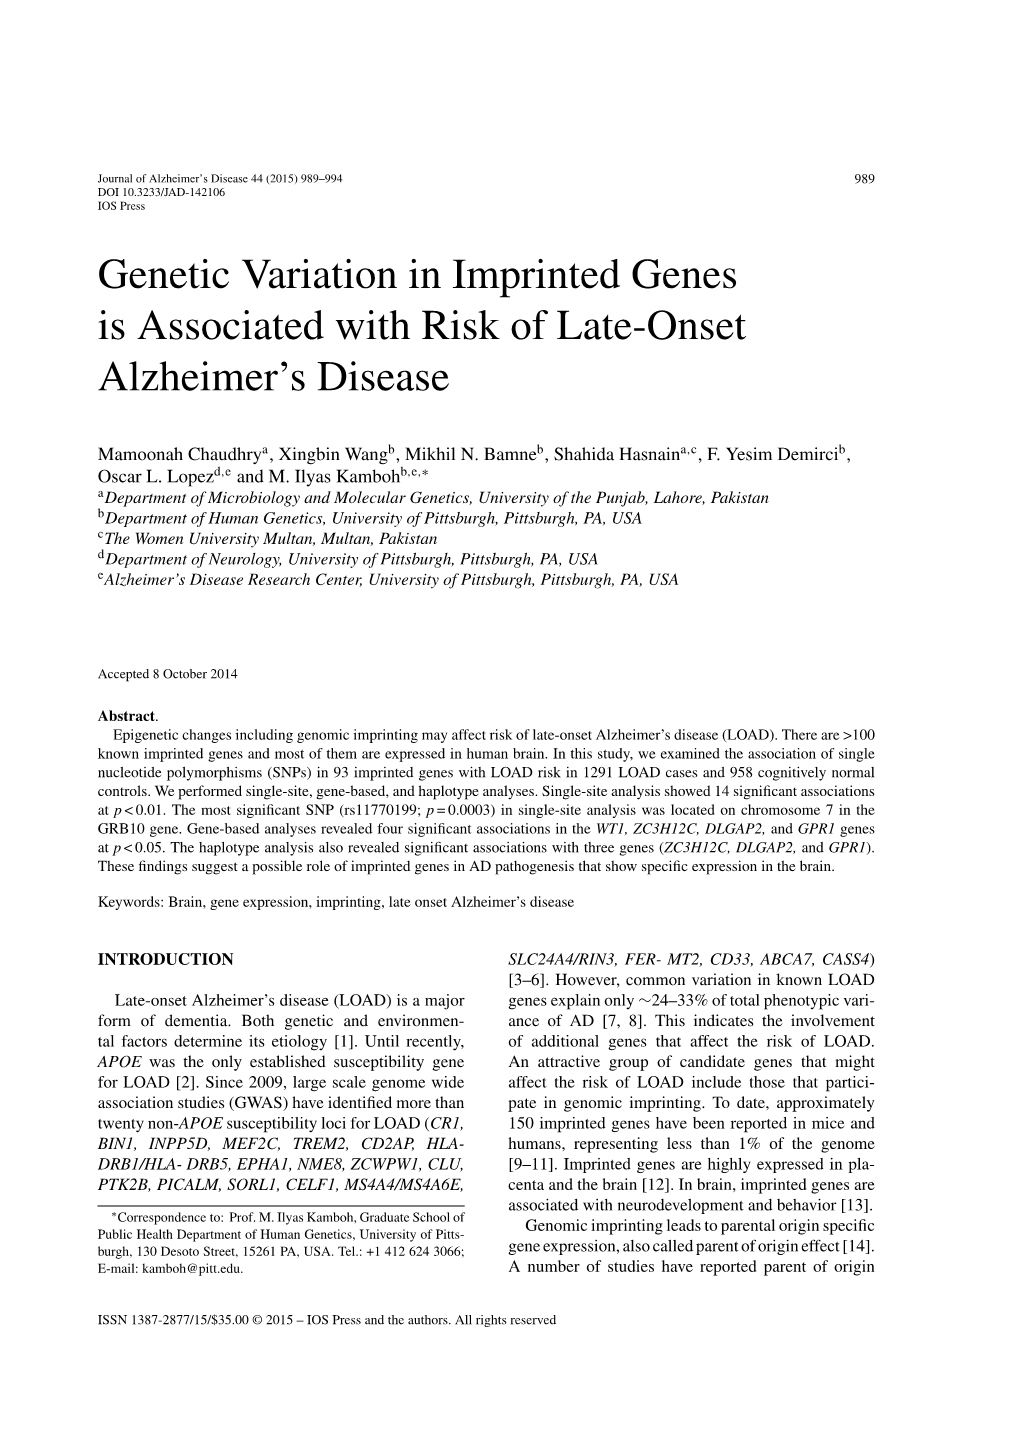 Genetic Variation in Imprinted Genes Is Associated with Risk of Late-Onset Alzheimer’S Disease